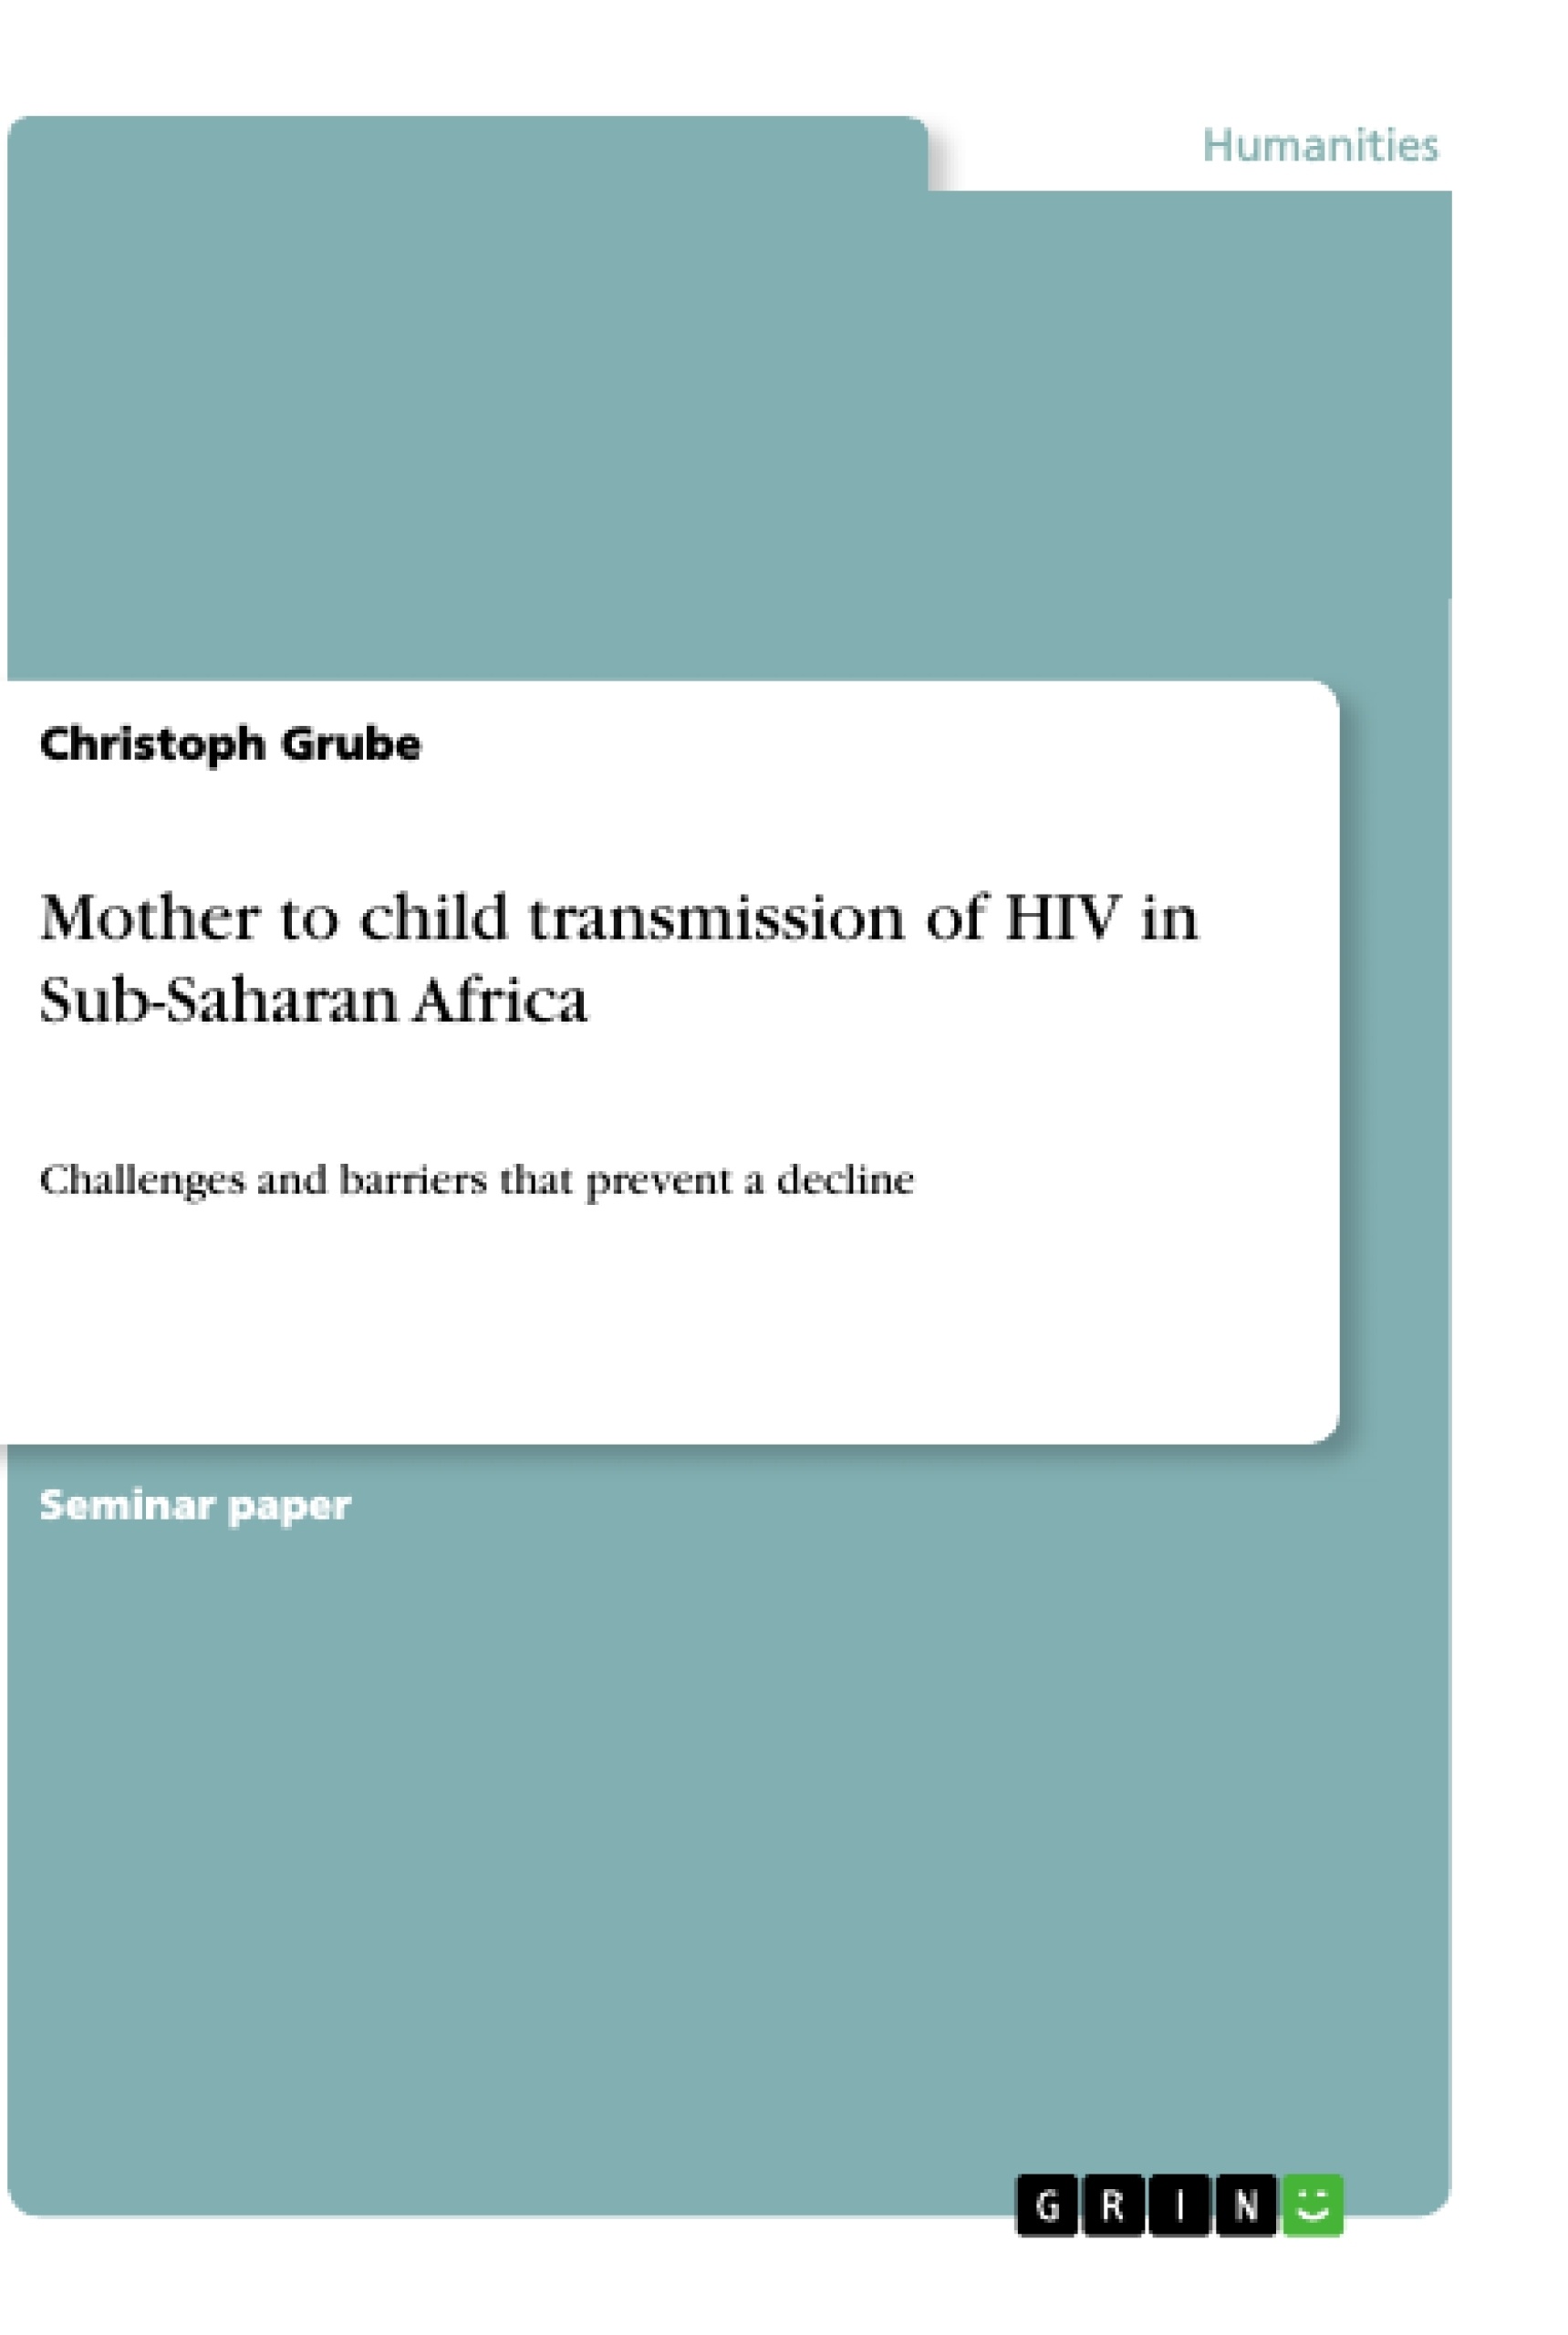 Title: Mother to child transmission of HIV in Sub-Saharan Africa